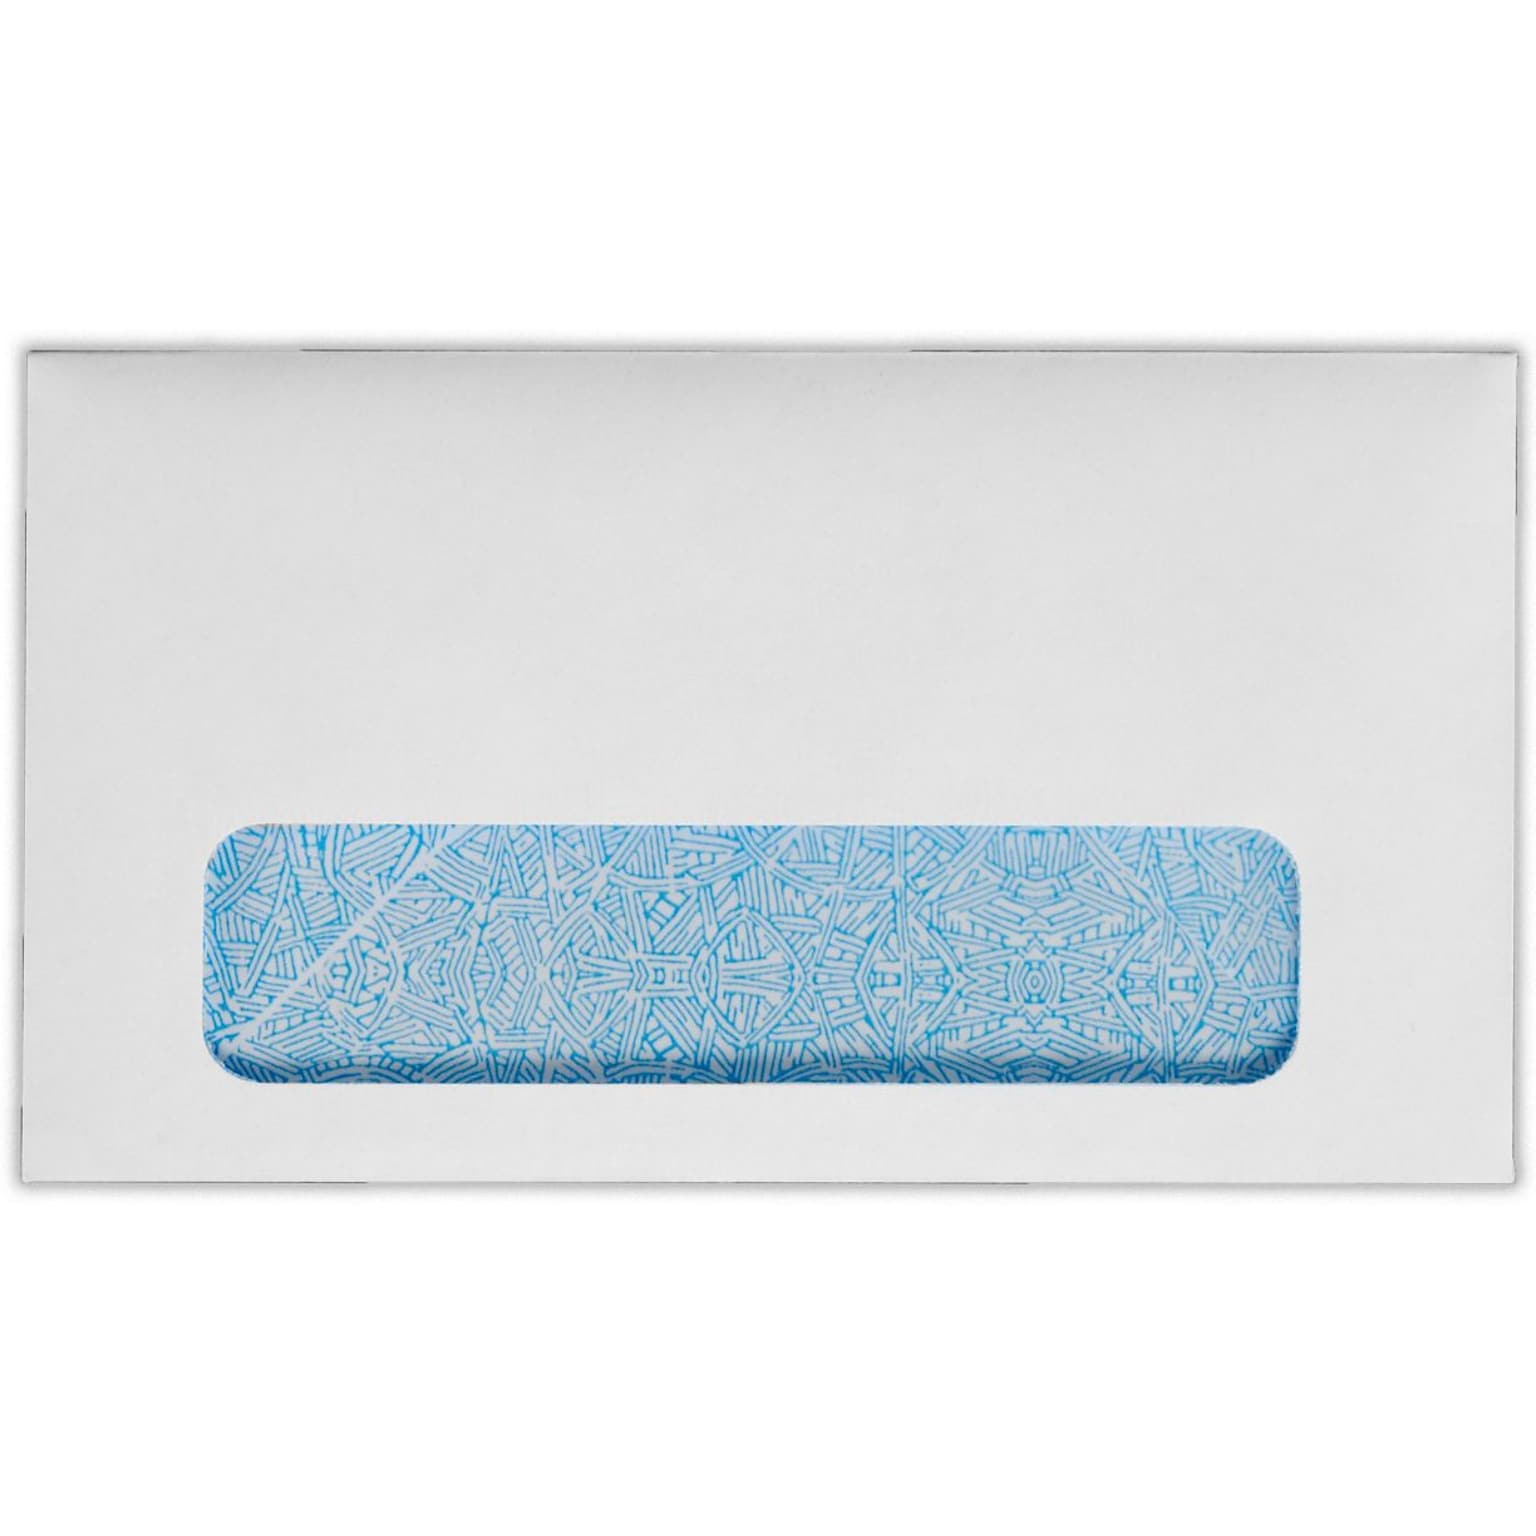 LUX Moistenable Glue Security Tinted #6 3/4 Window Envelope, 3 5/8 x 6 1/2, Bright White, 500/Pack (634W-W-500)